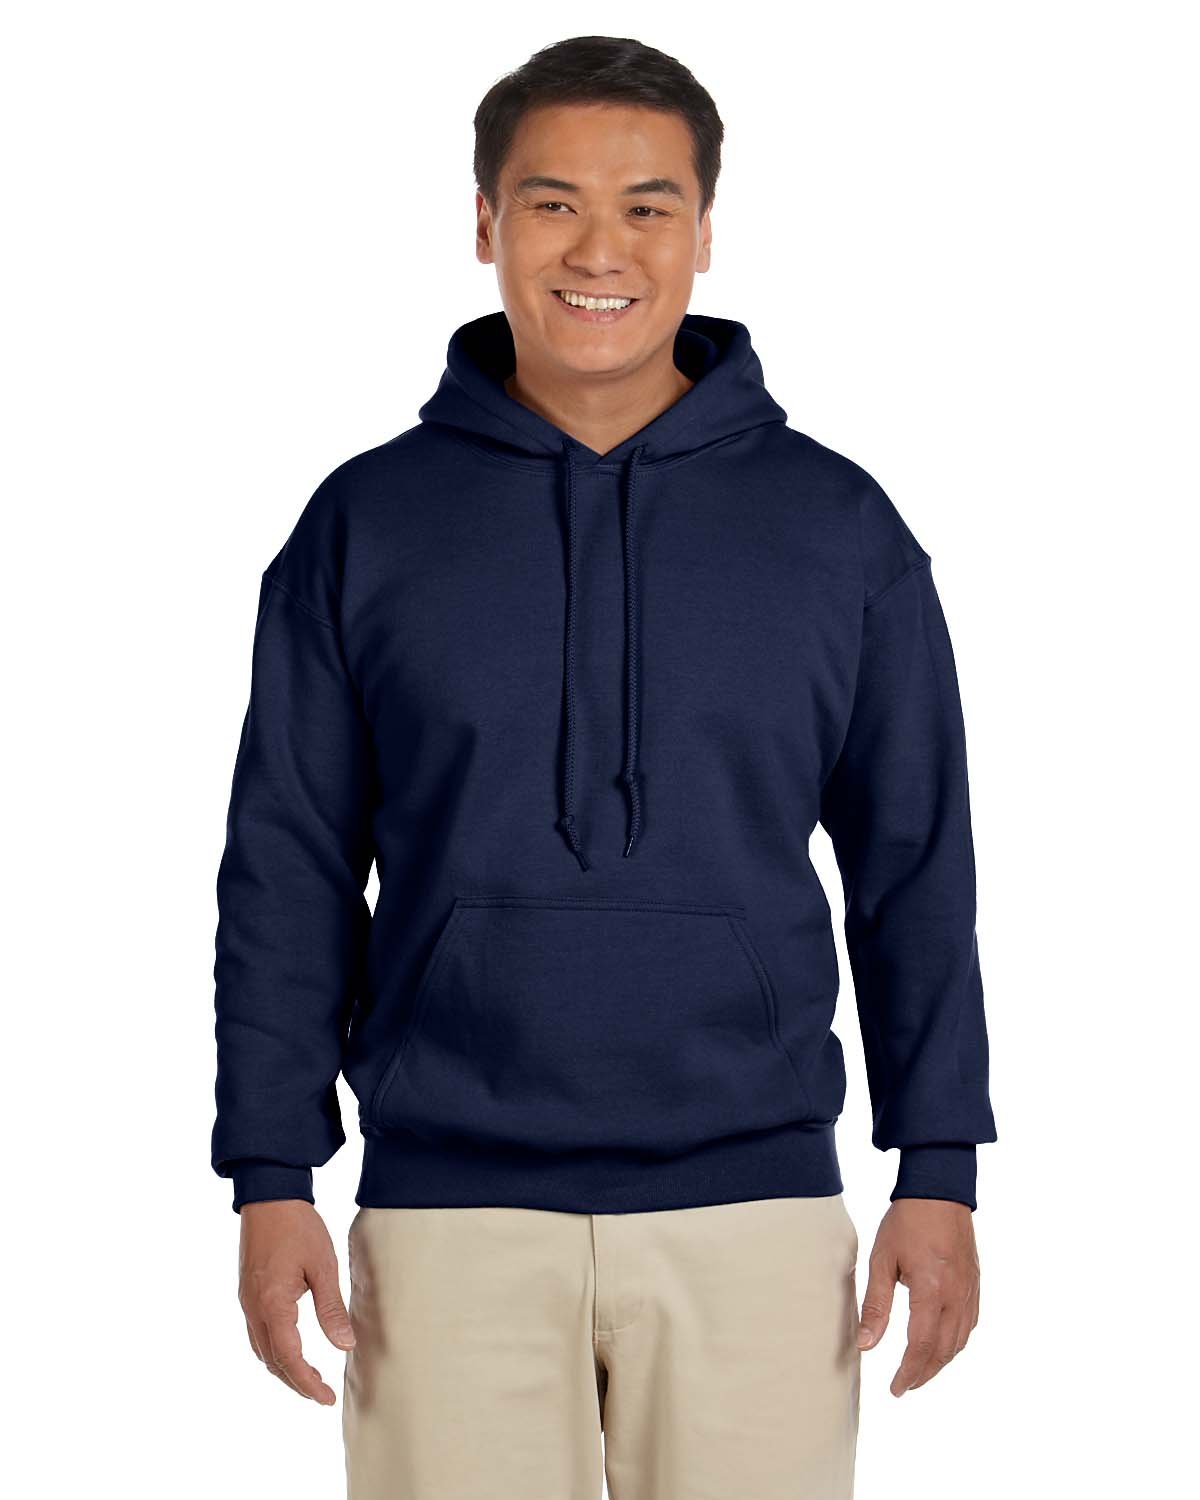 Pullover Hooded Sweatshirt with GCC logo